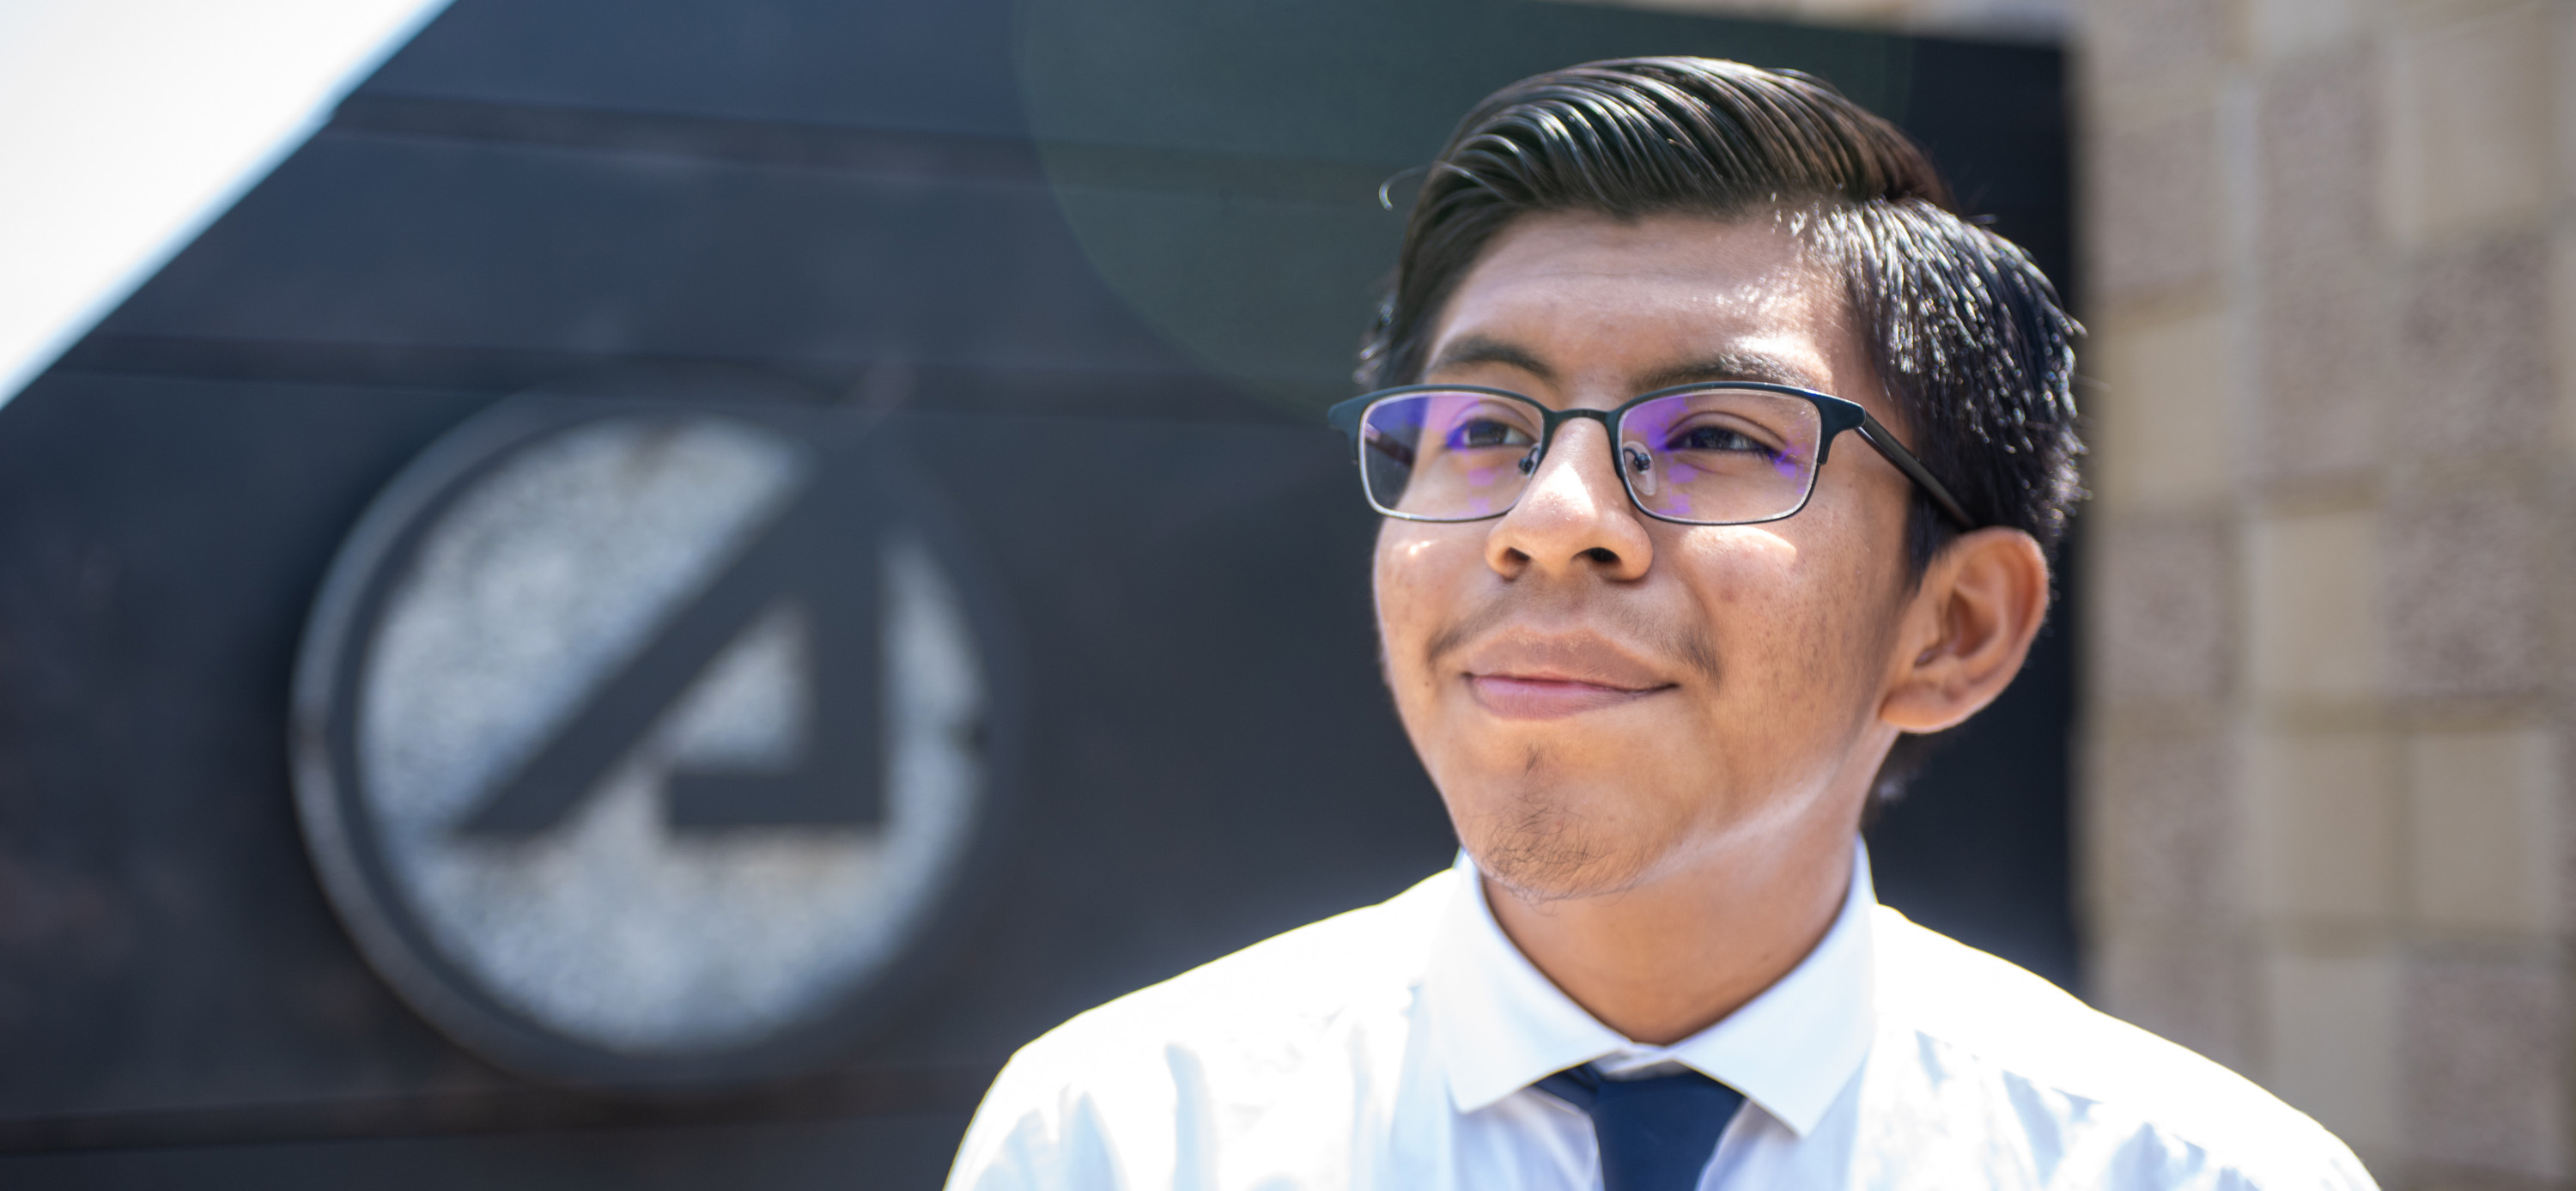 Bryan Ovidio Chun, this year’s recipient of this year’s Dr. Wanda M. Austin STEM Scholarship, will be a first-generation college student and hopes to inspire the next generation of STEM leaders.